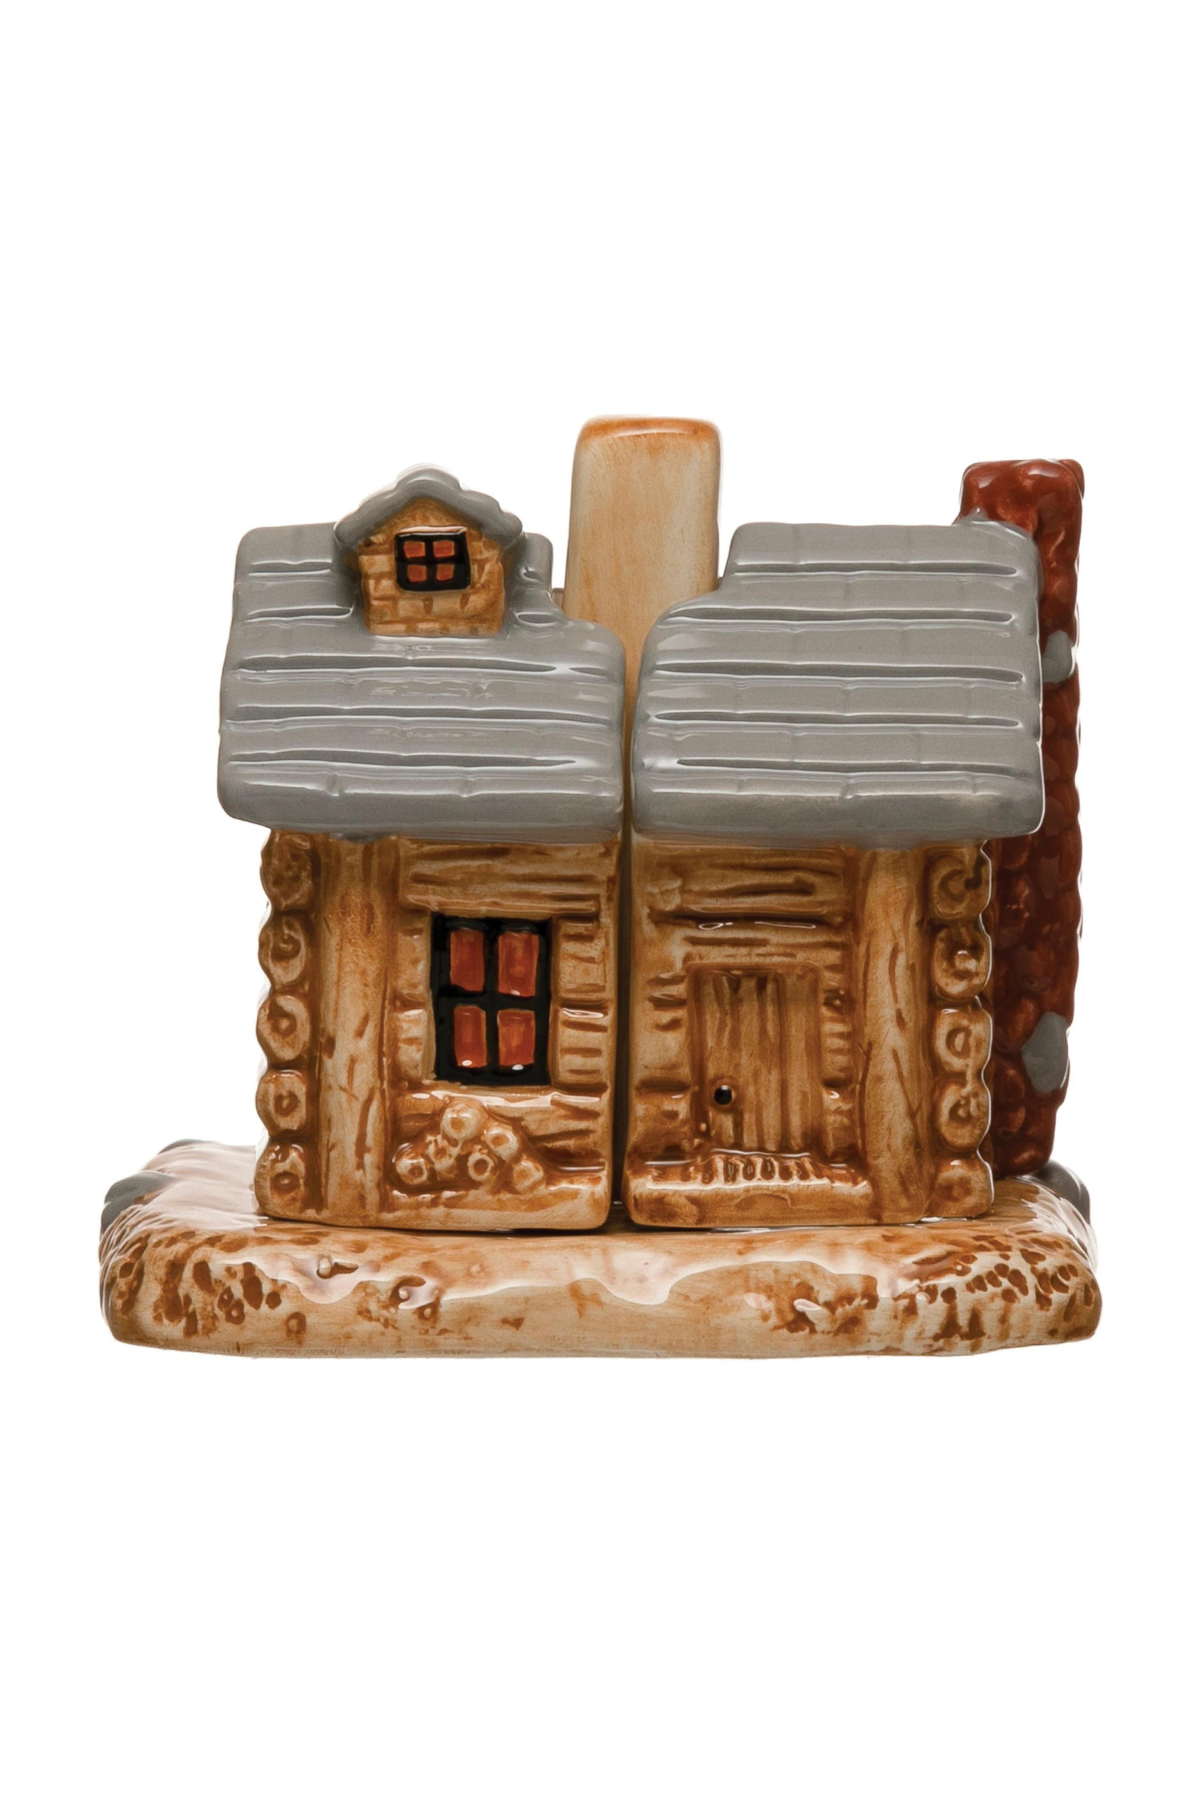 Cabin Salt and Pepper Shakers